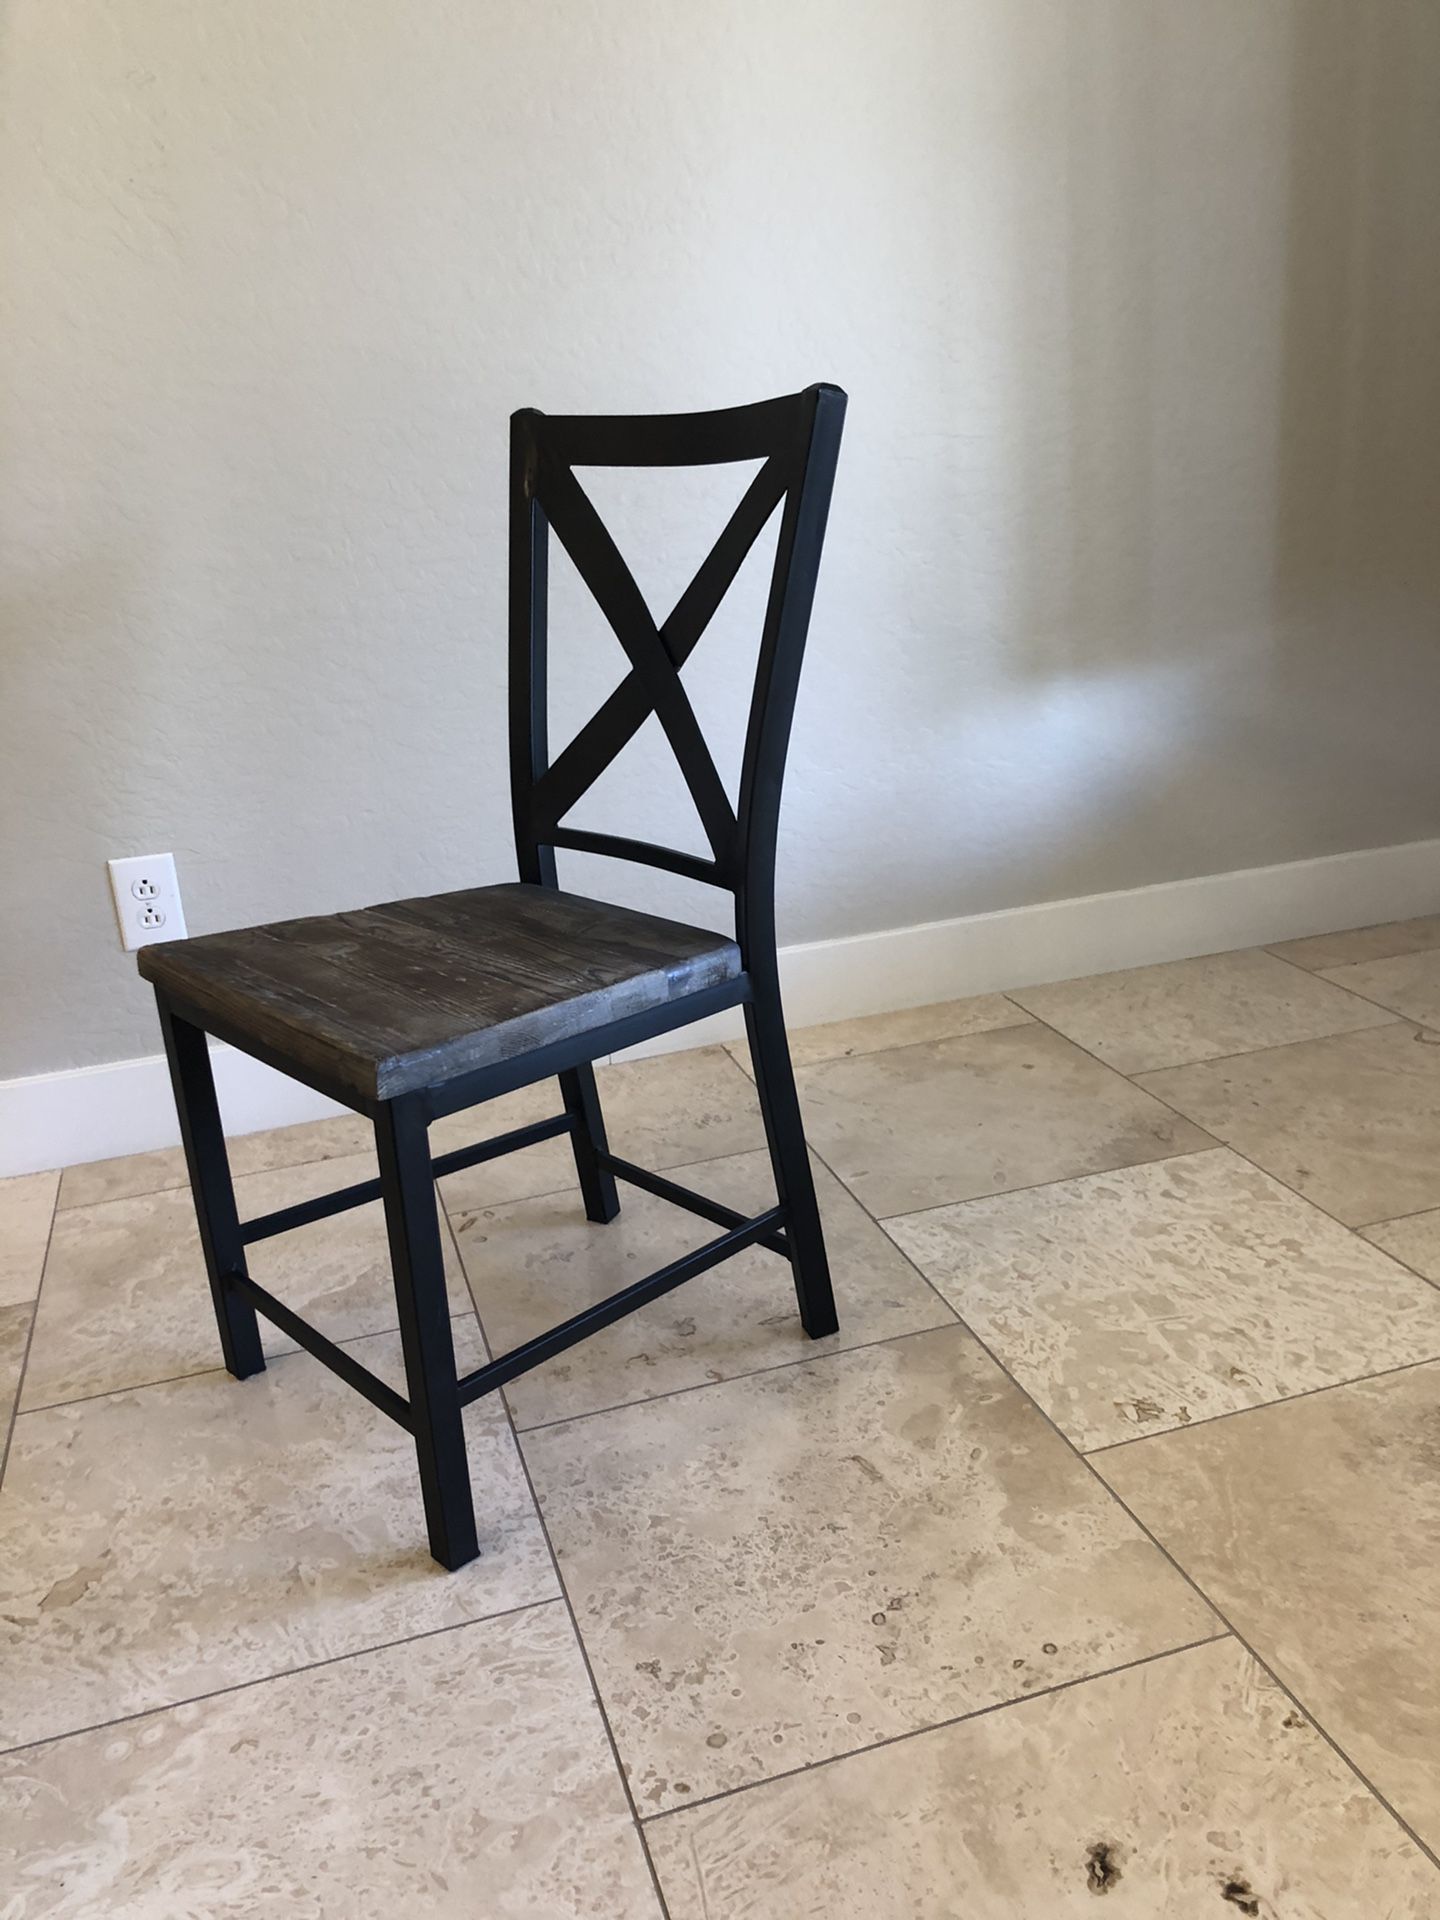 Six practically new dining chairs from Potato Barn. Excellent shape, hardly used. Material is dark expresso black w wood seat. Six chairs available,